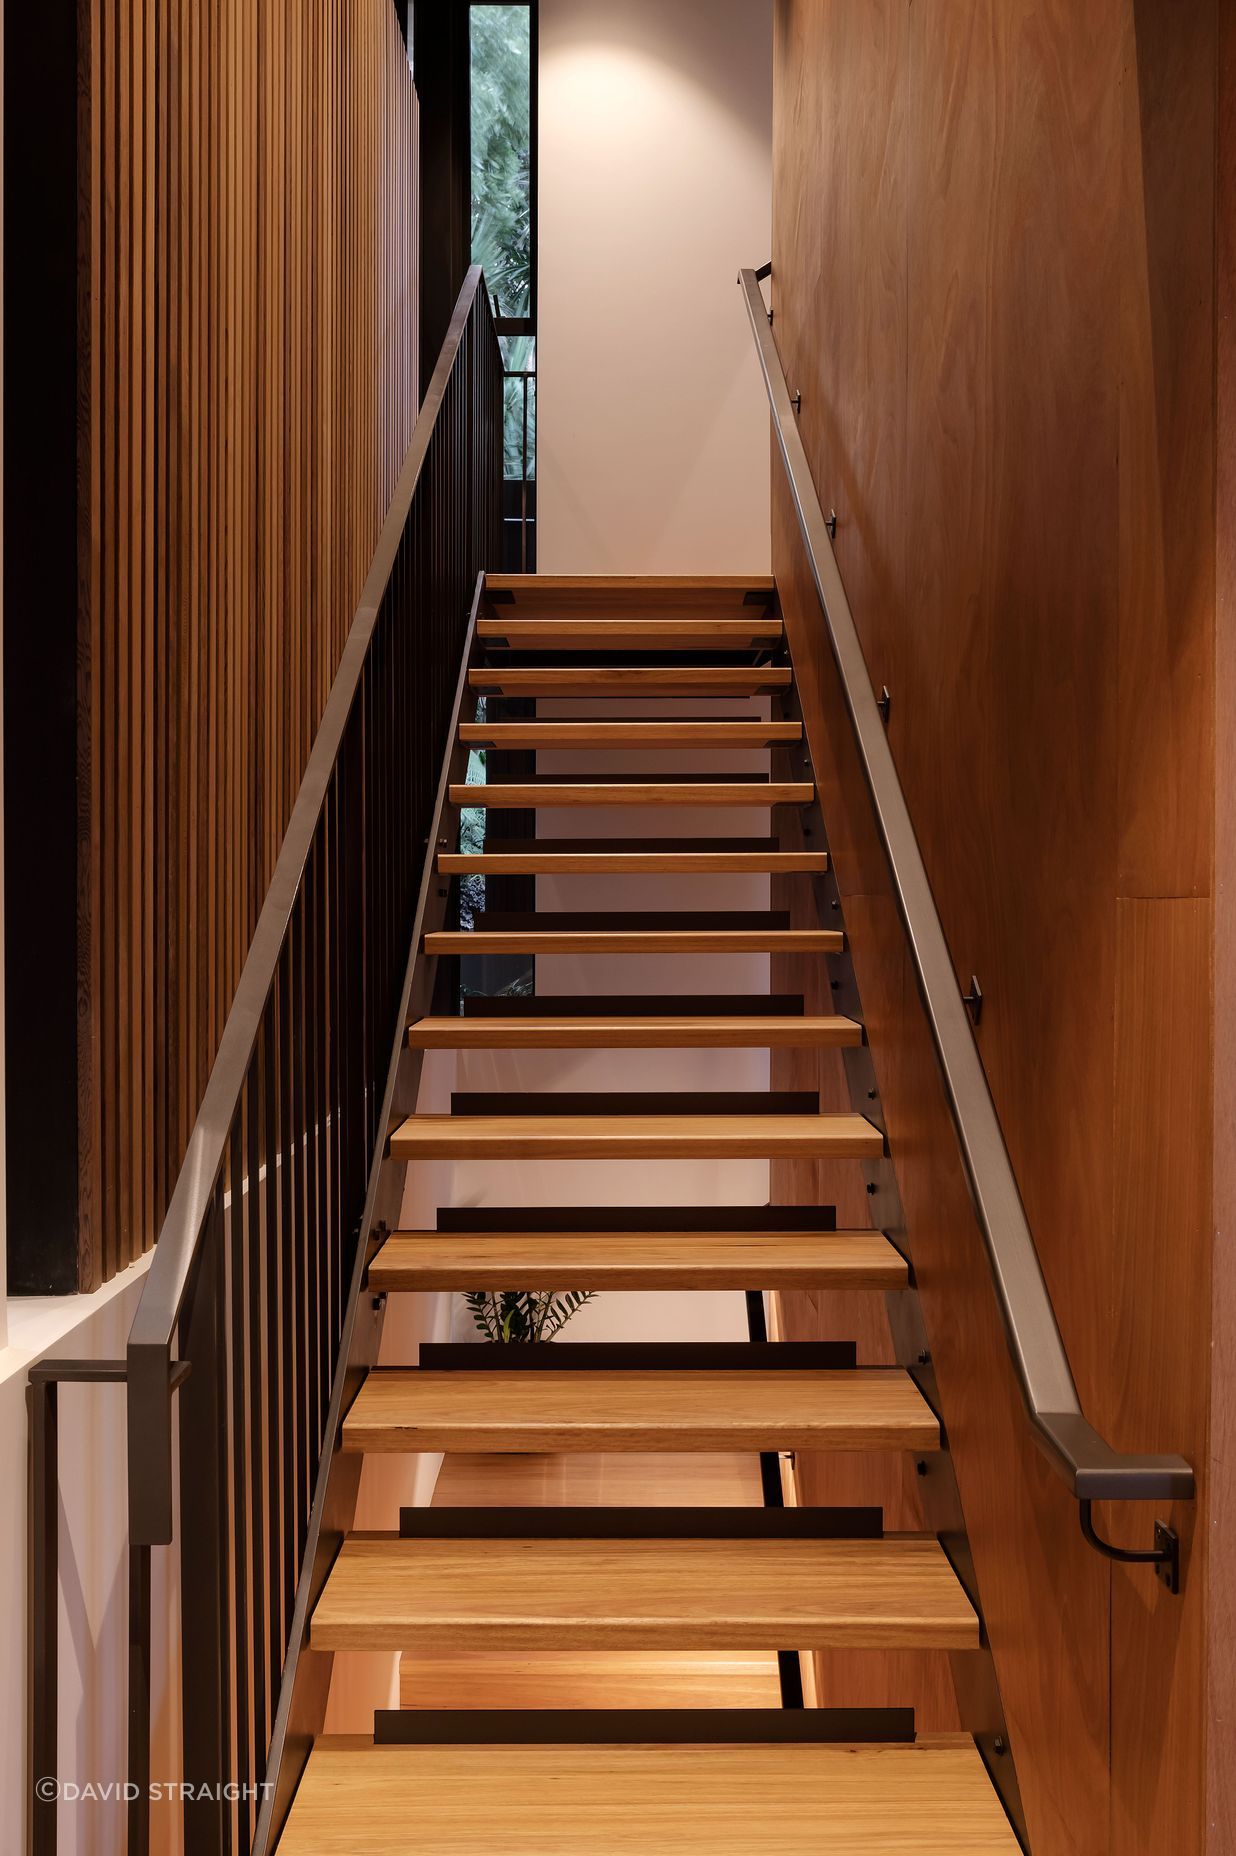 The open treads of the stairs to the main bedroom let light through. There is also a platform lift in the house: convenient now and for easier upstairs access if needed in the future.